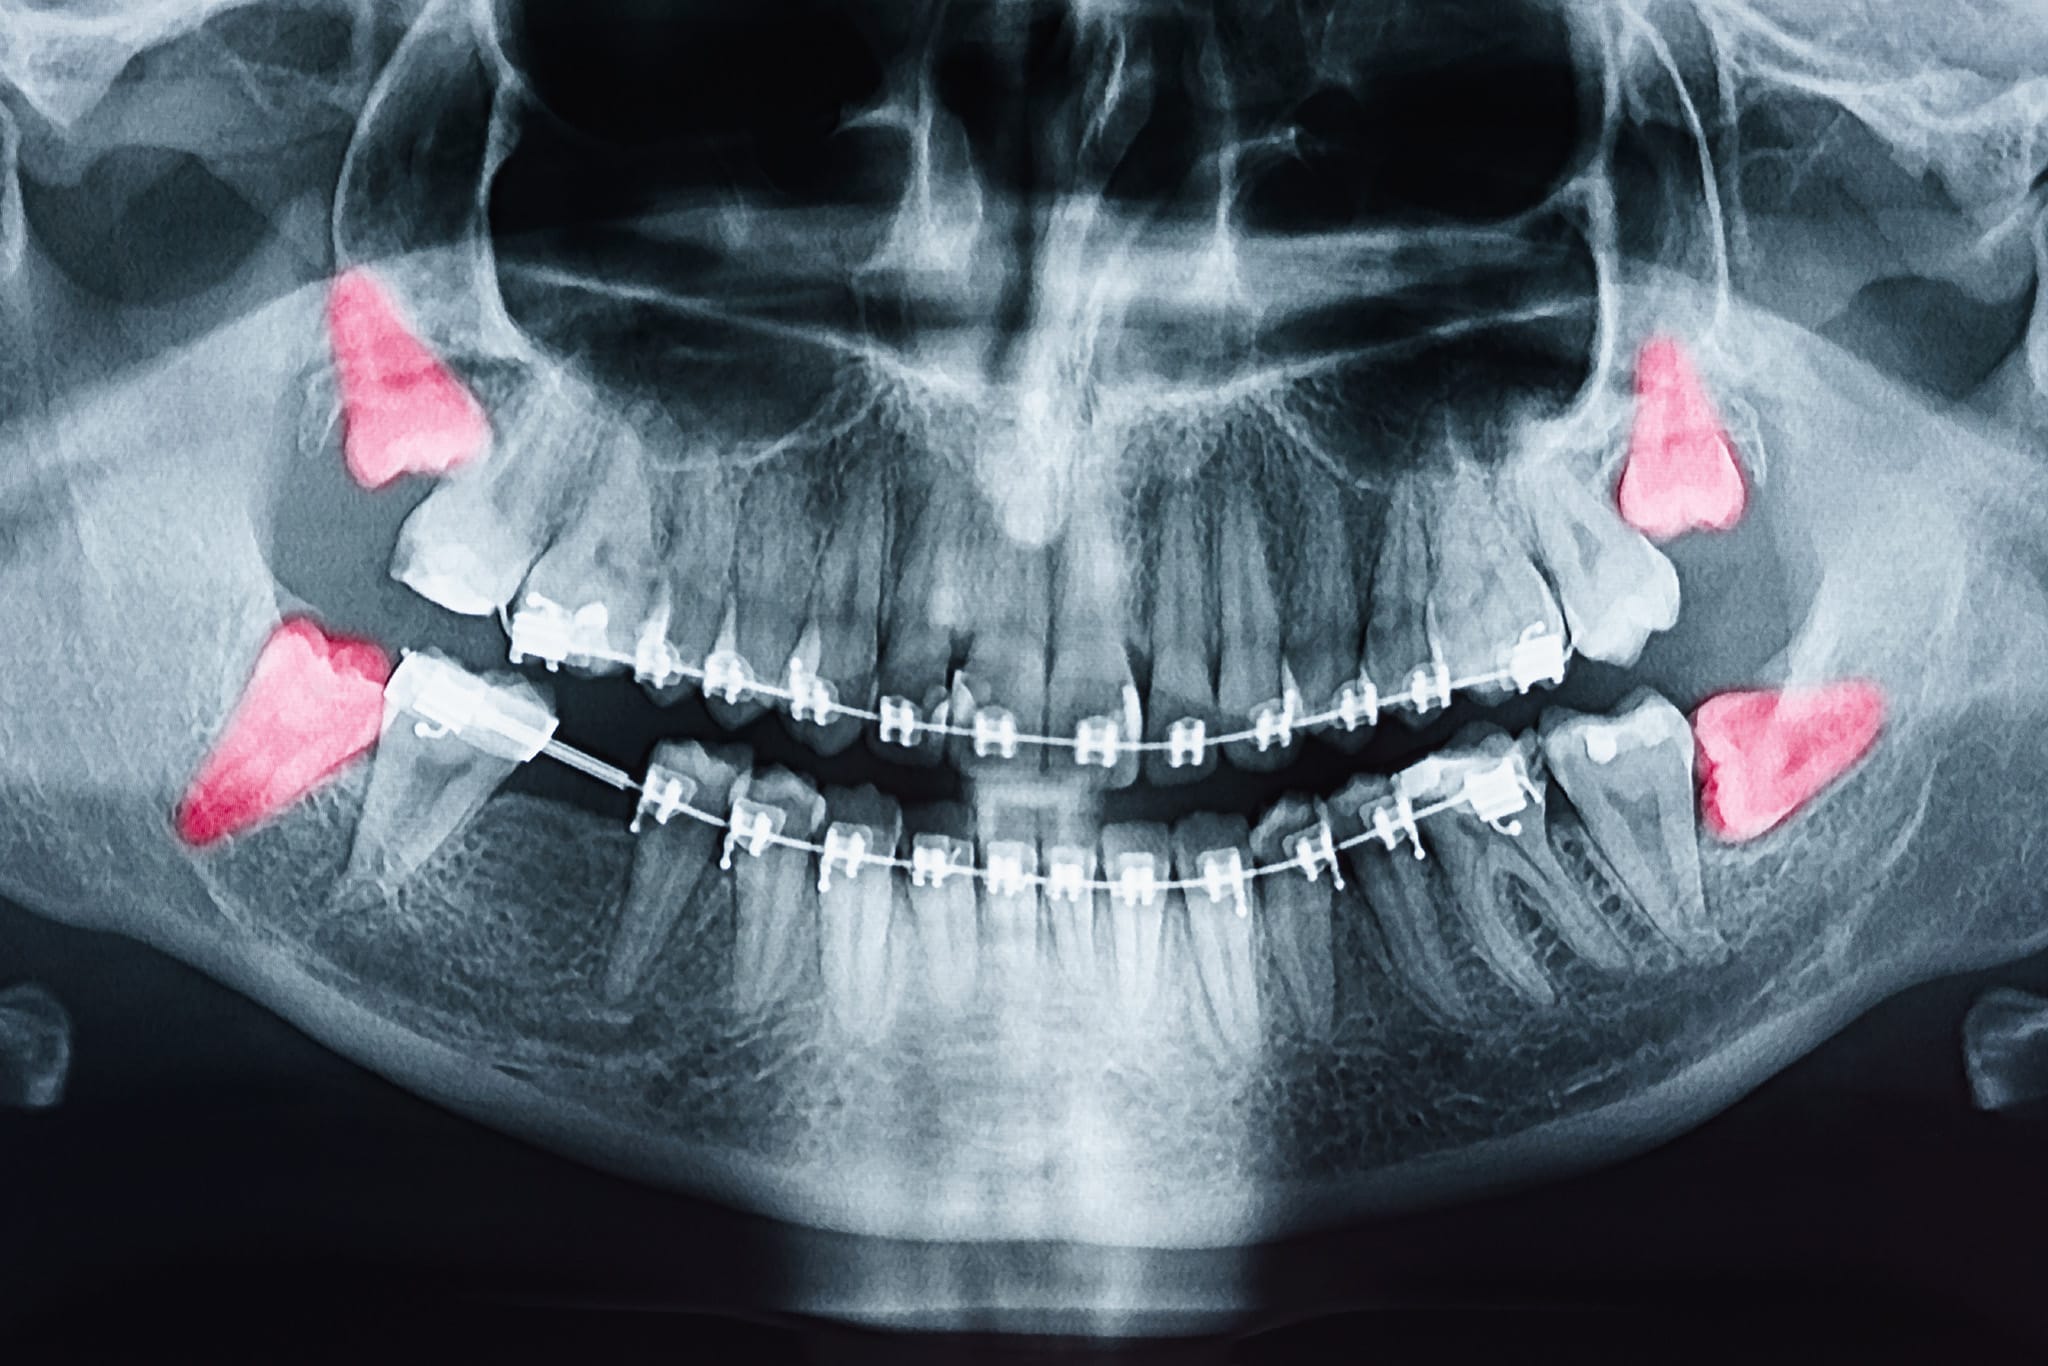 A photograph of an x-ray highlighting the location of wisdom teeth.